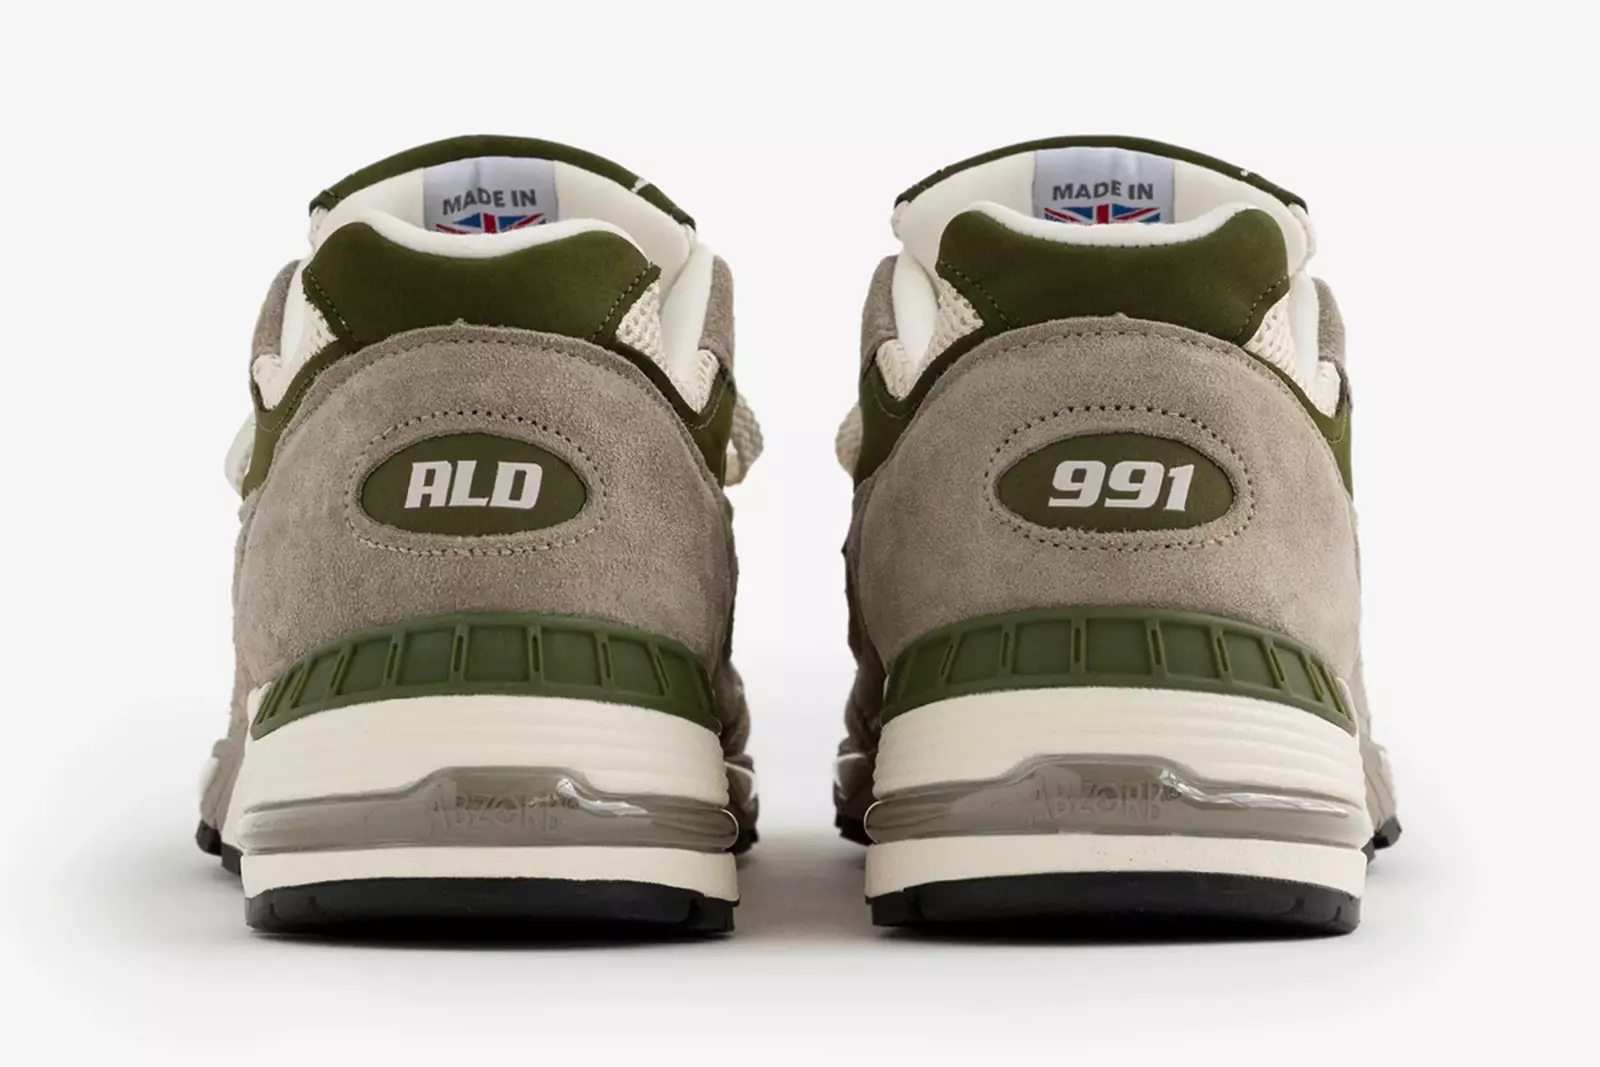 Aimé Leon Dore reveals their first New Balance Made in UK collab